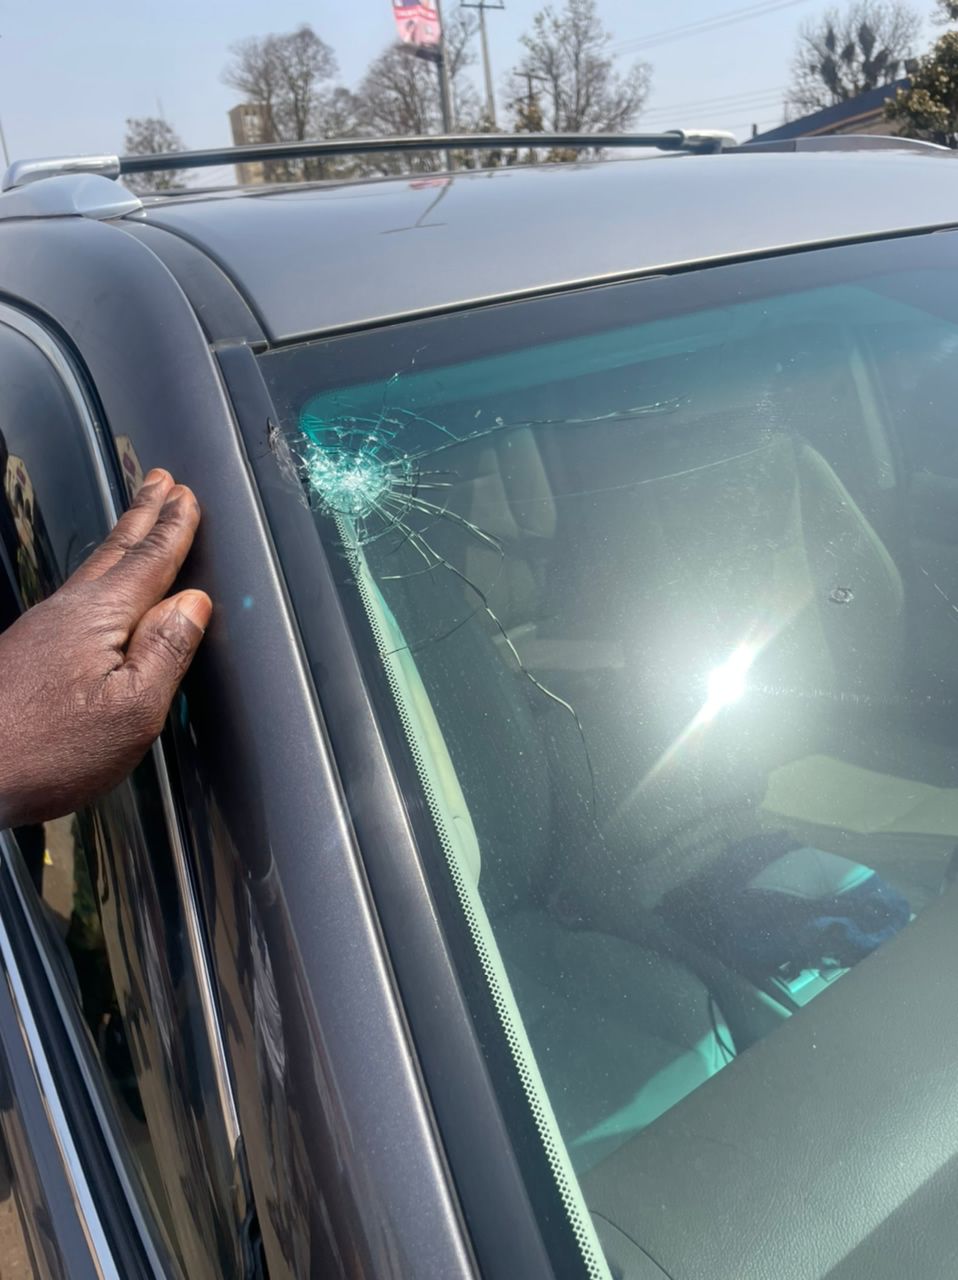 Tension In Ondo community As Lawmaker, Adefisoye Narrowly Escapes Assassination